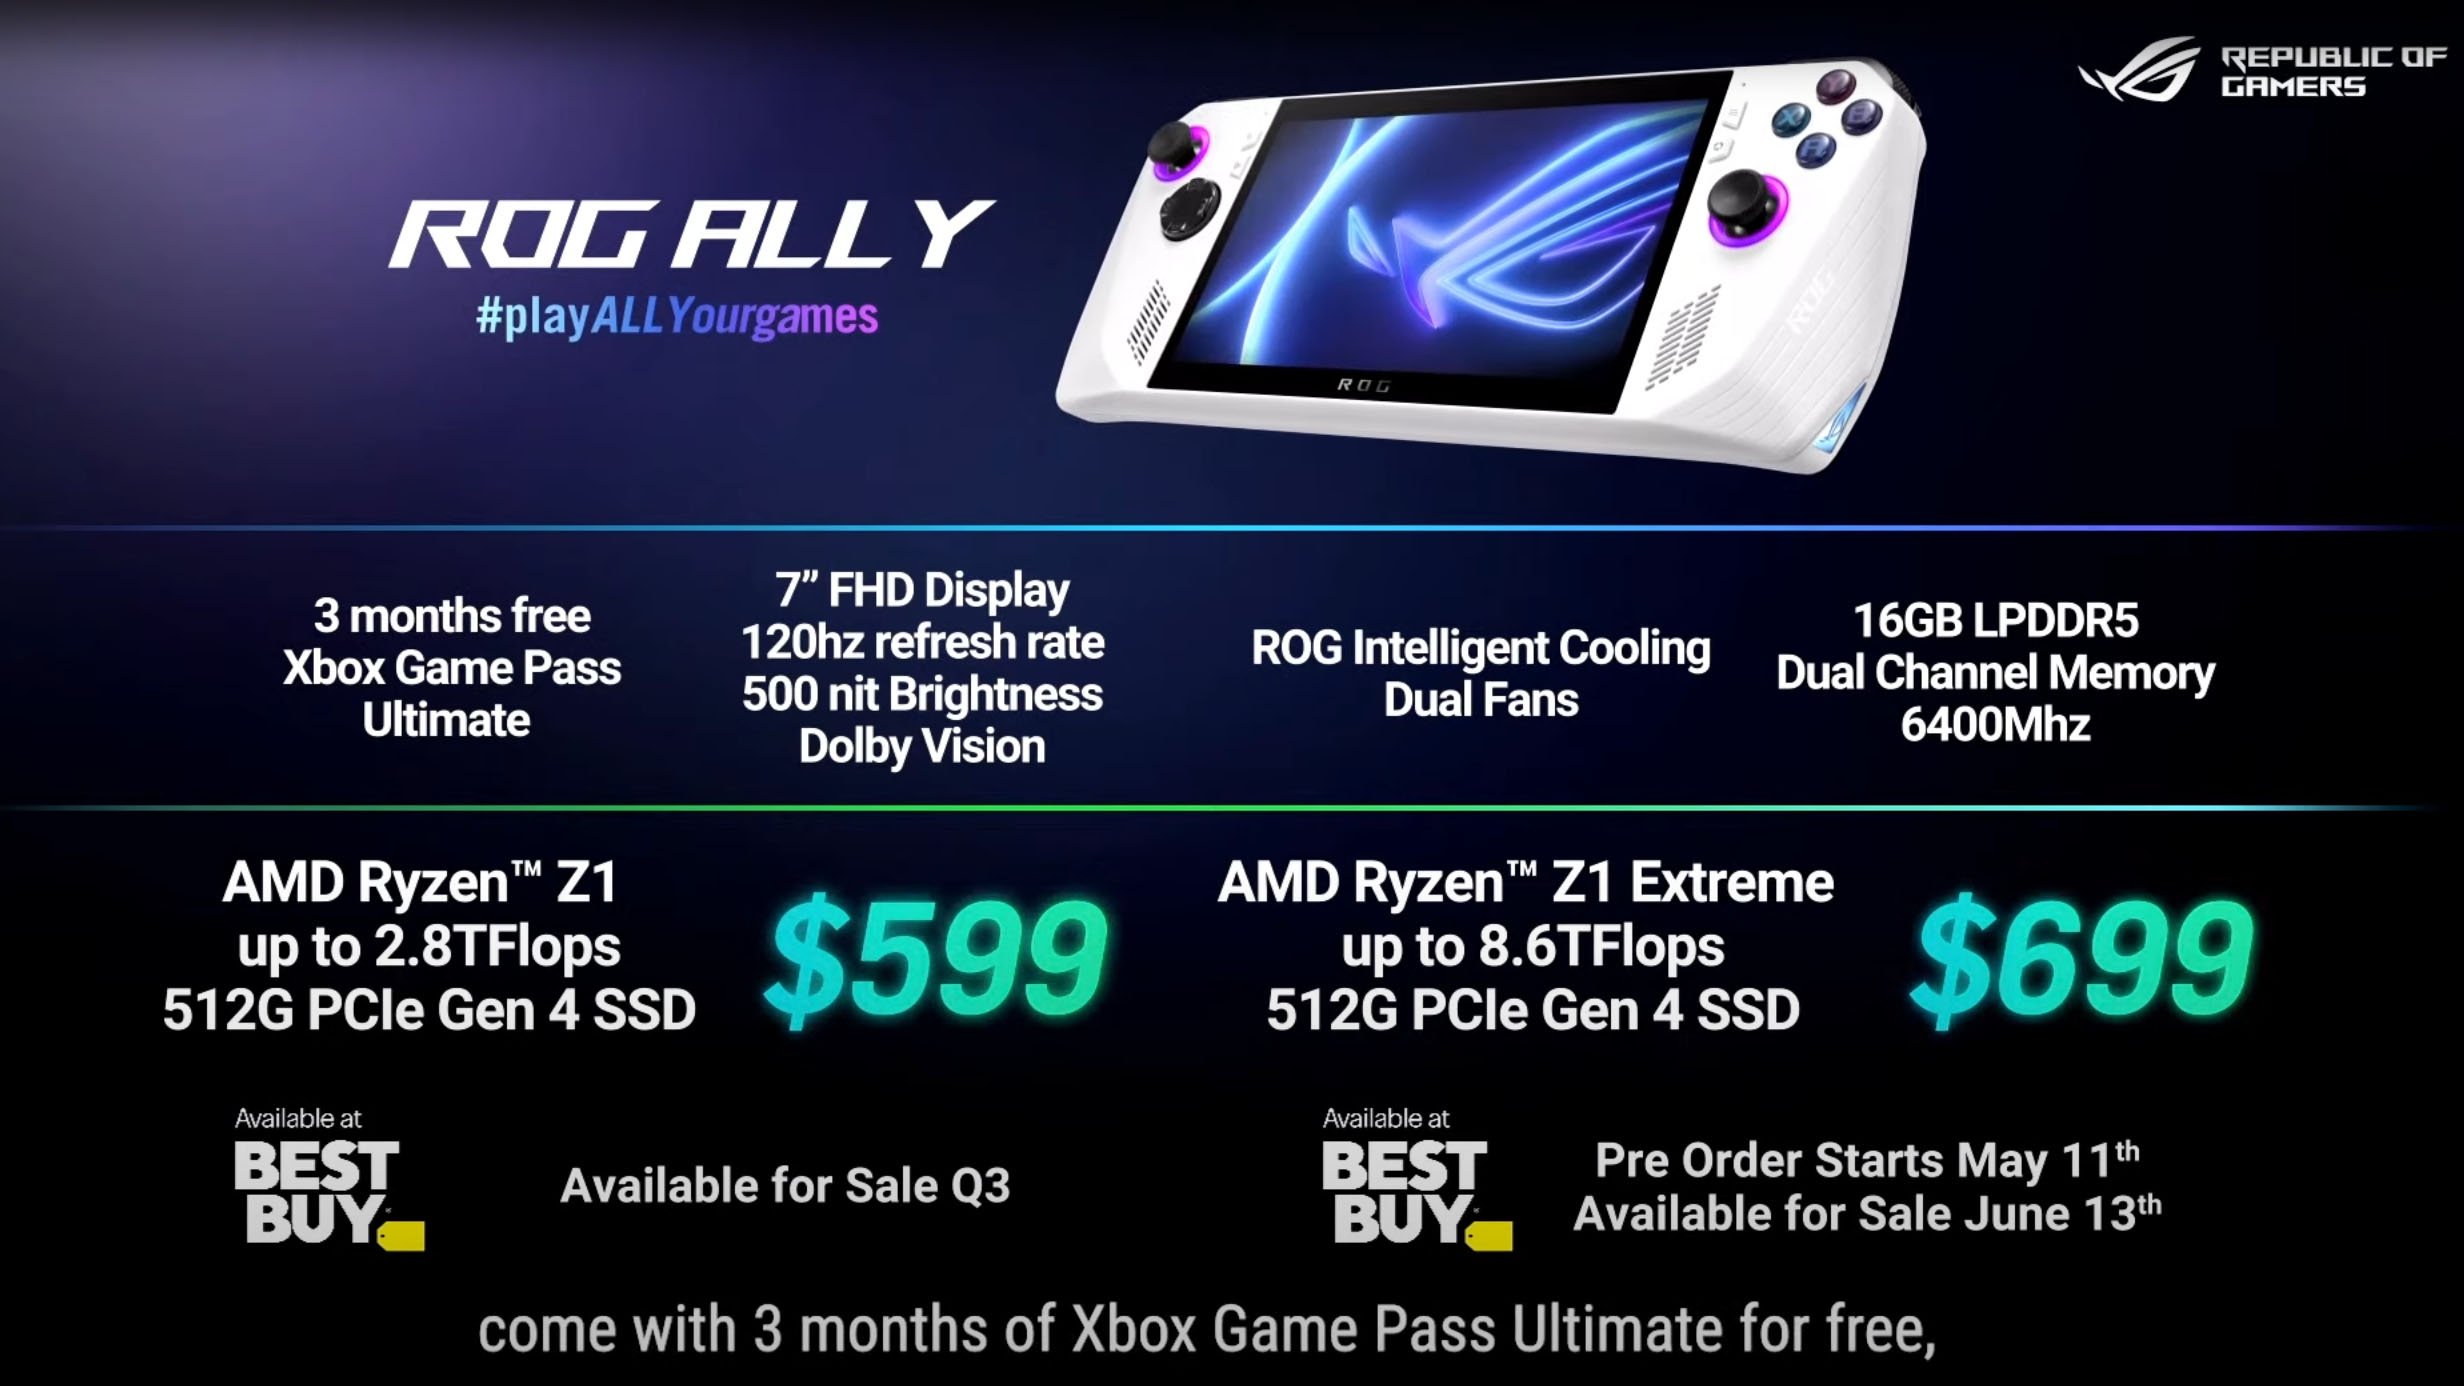 ROG Ally pricing.